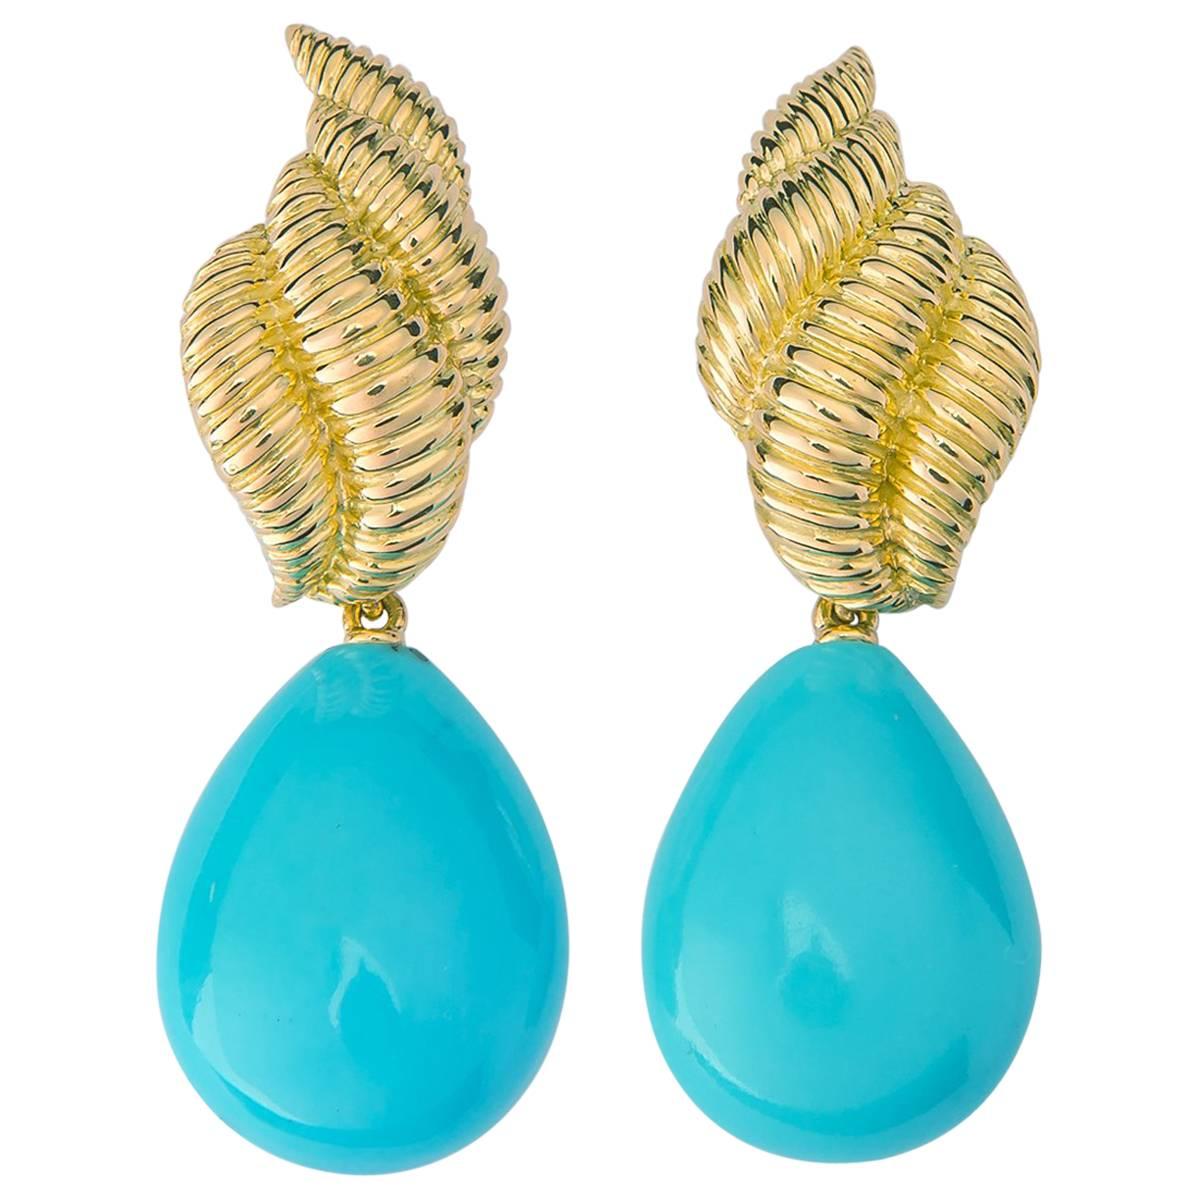 Exceptional Tiffany & Co. Turquoise Drop Earrings